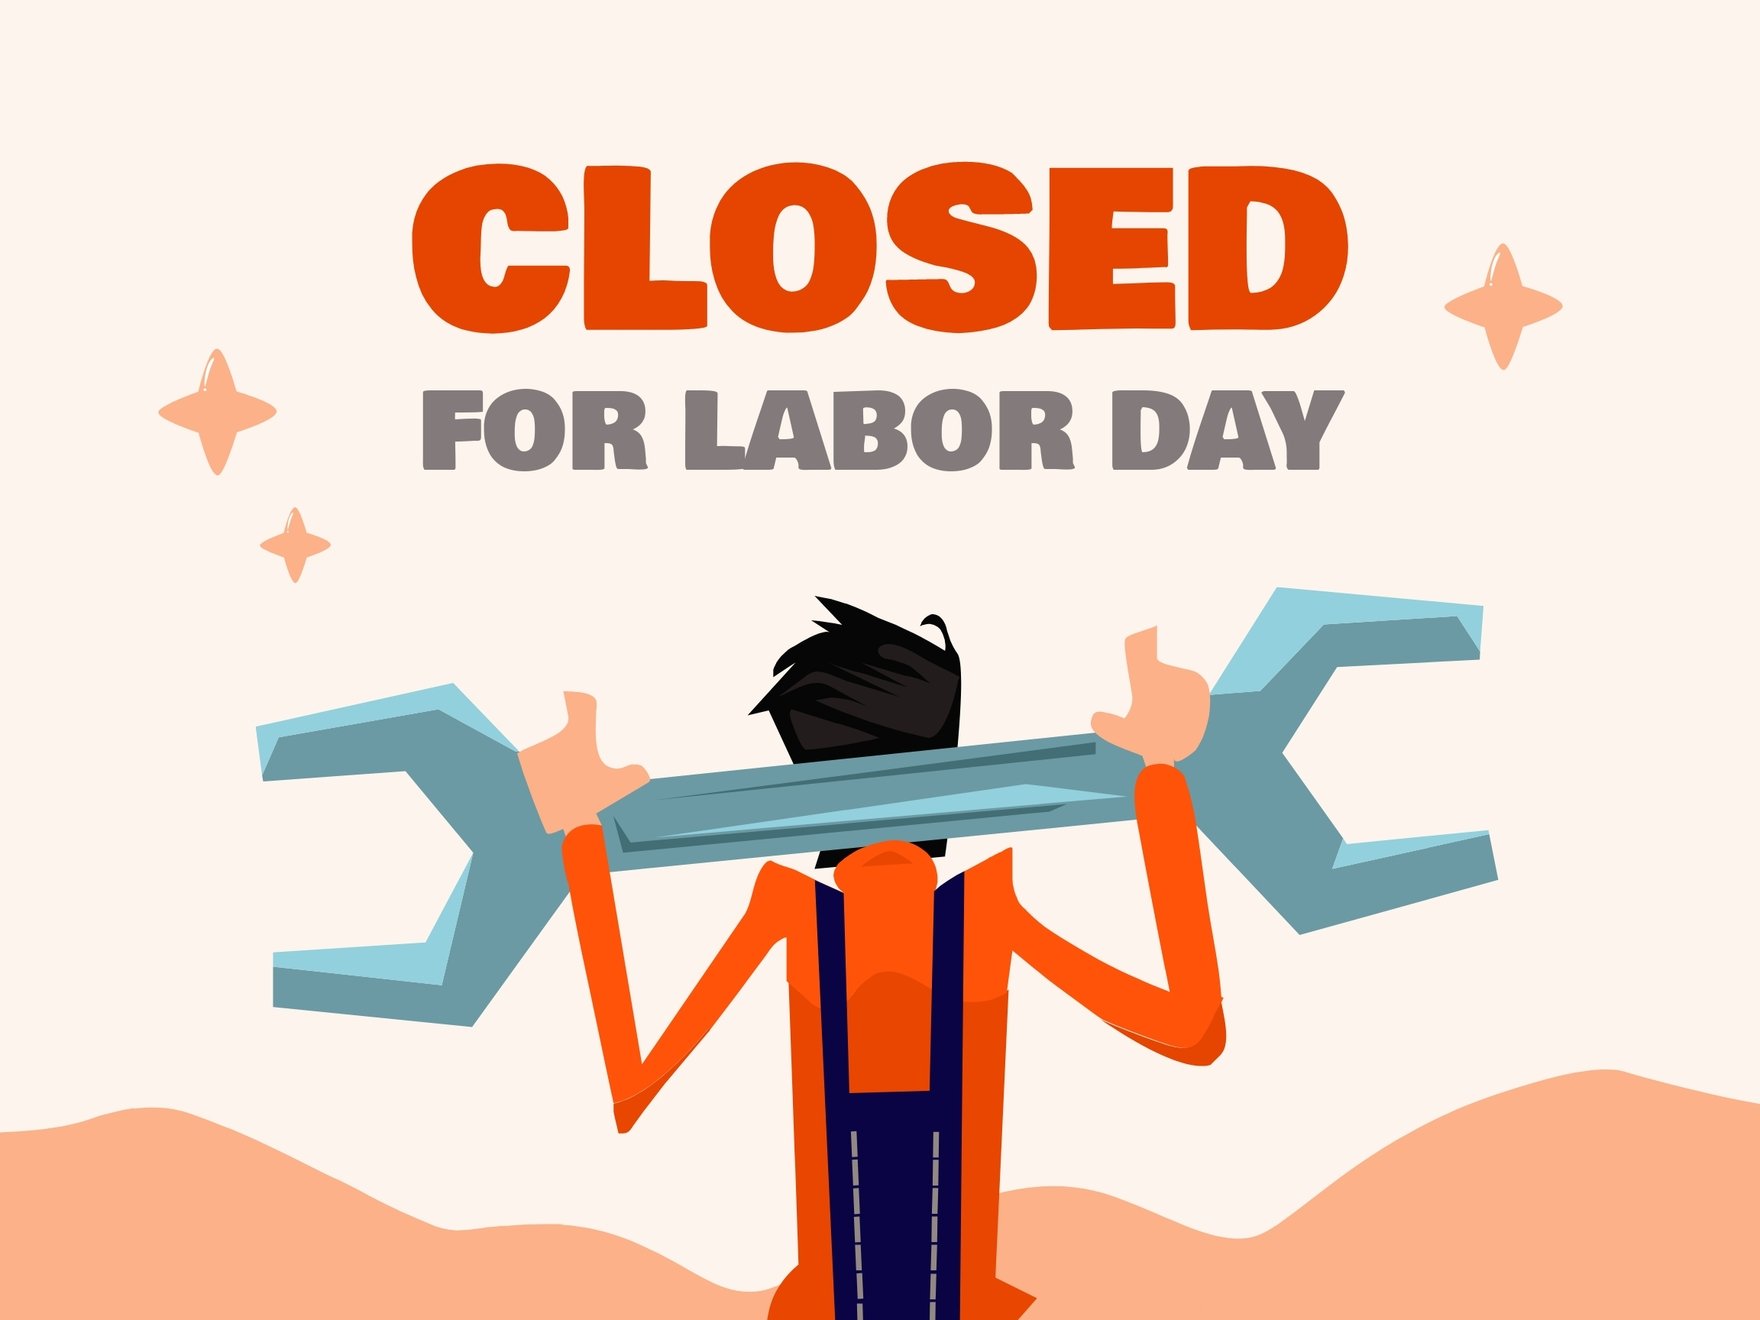 Closing For Labor Day Sign